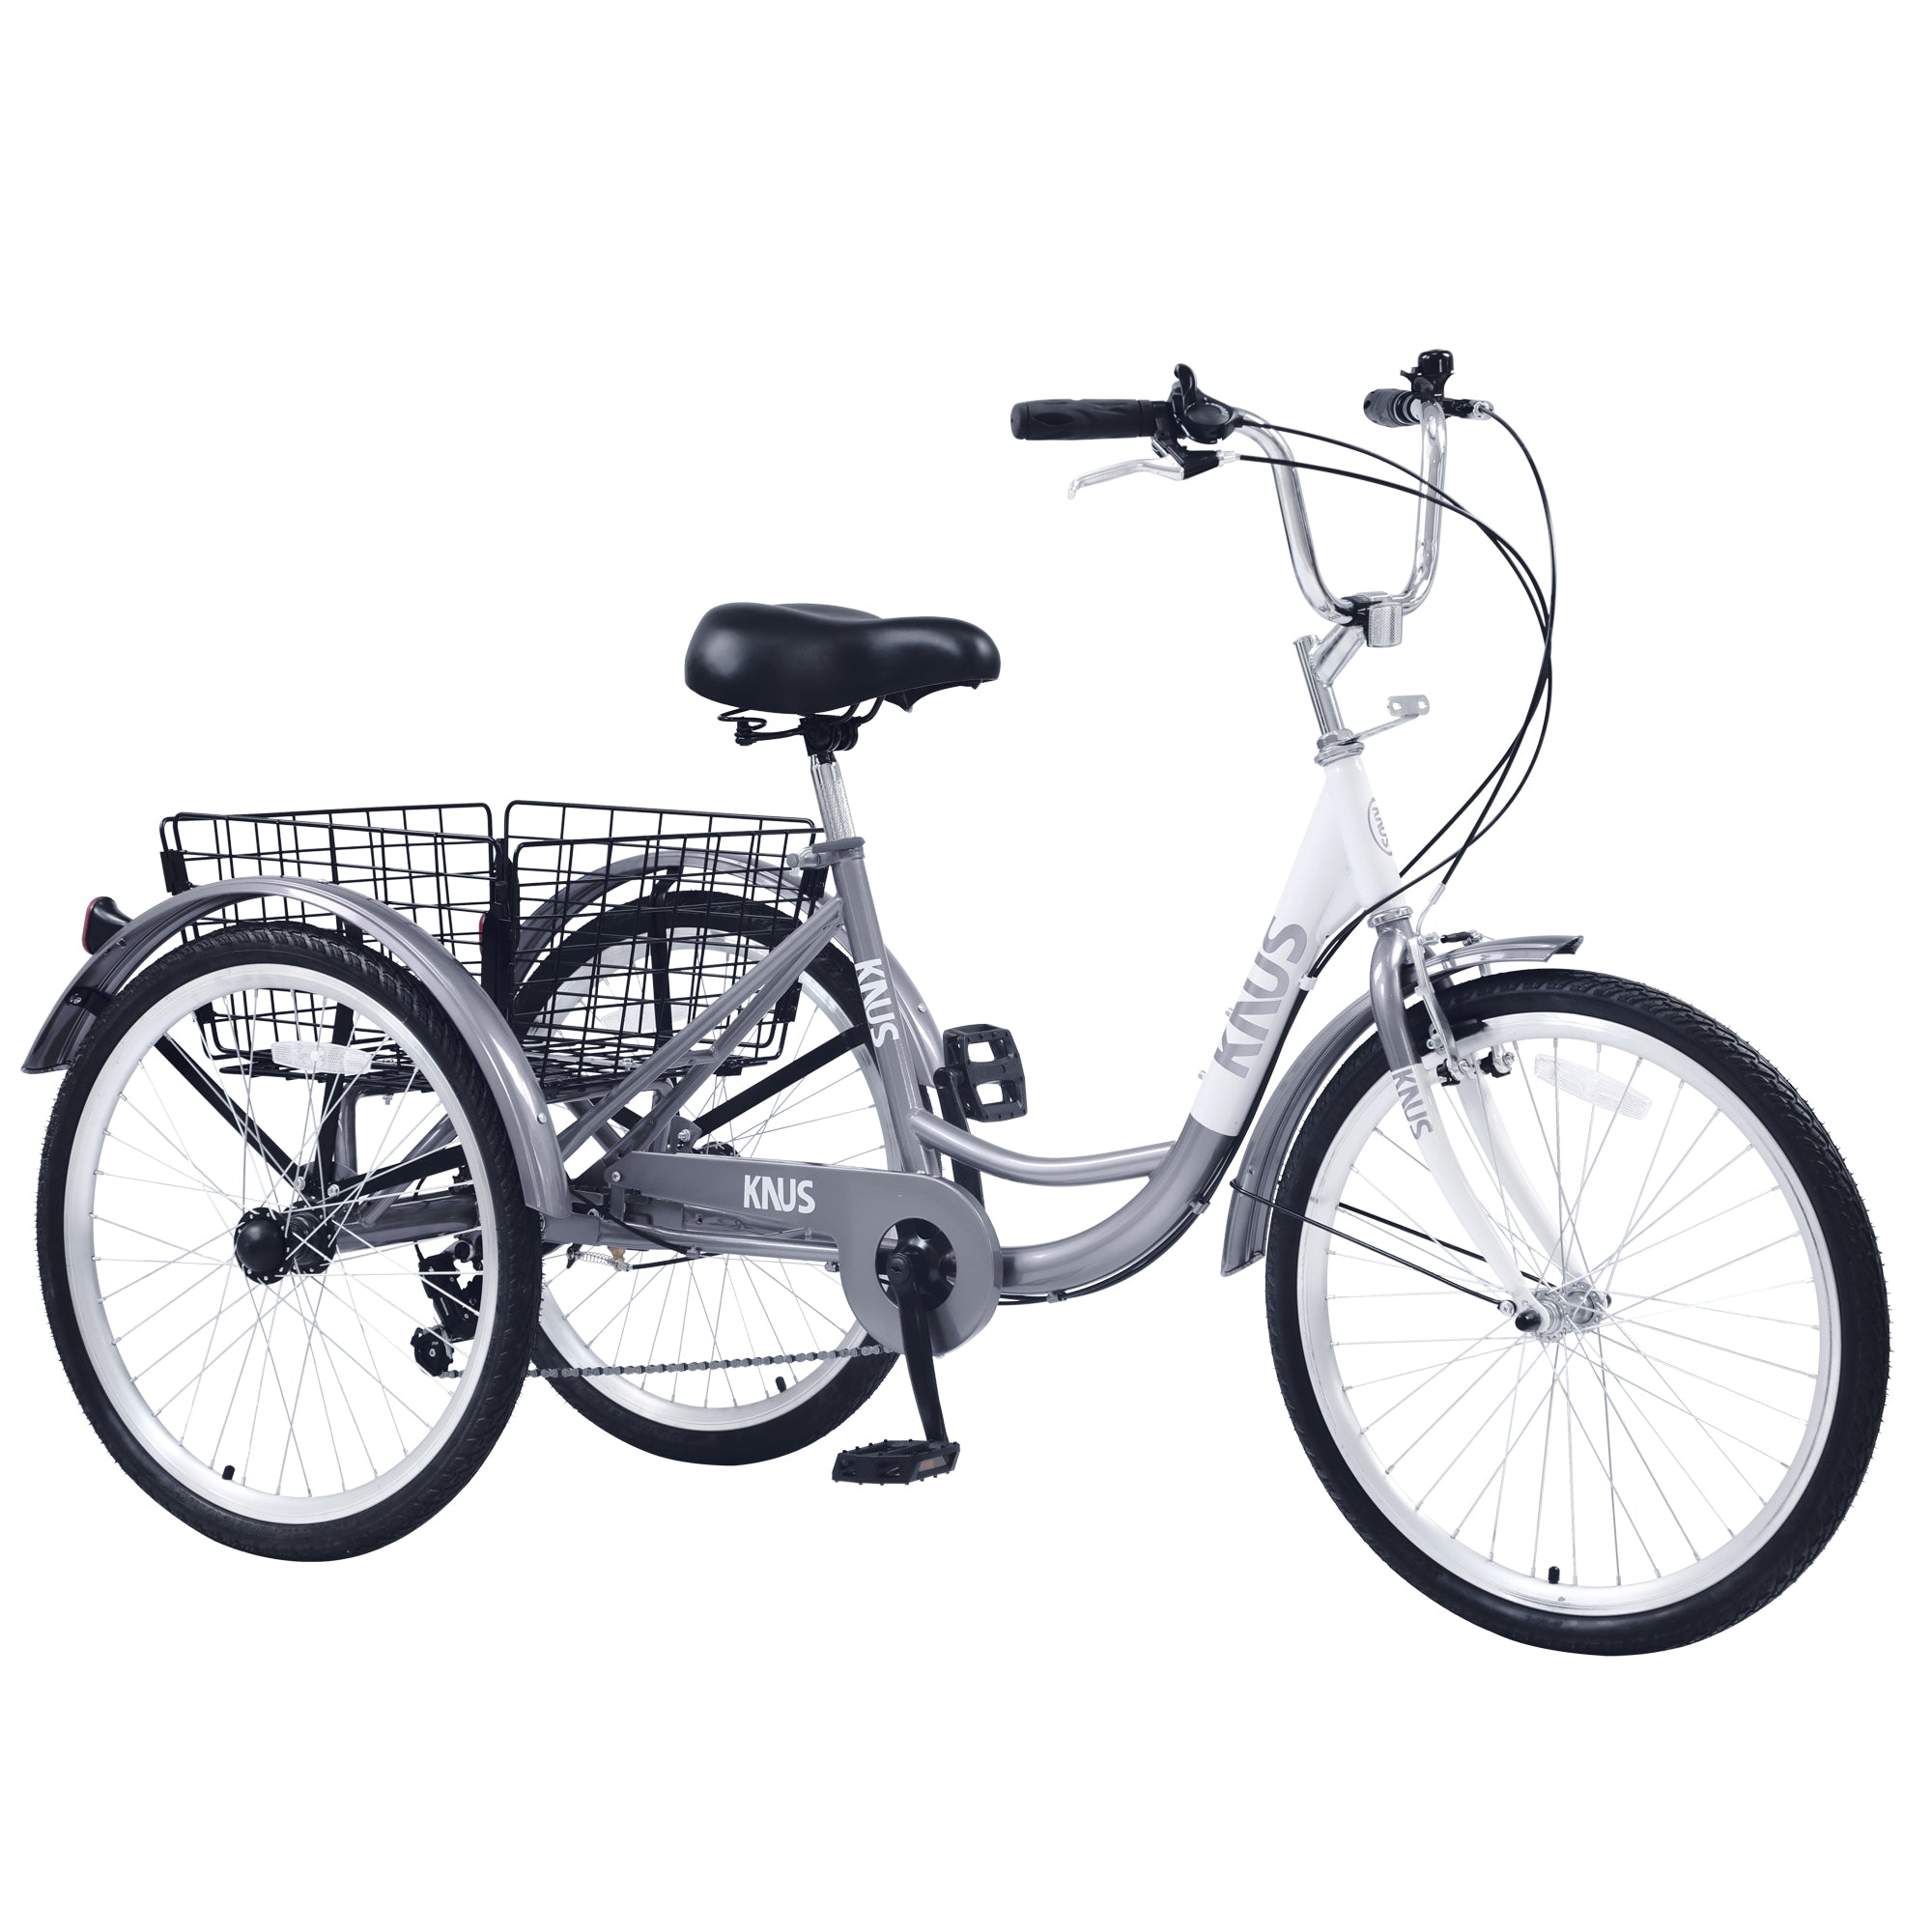 ZNTS Adult Tricycle Trikes,3-Wheel Bikes,24 Inch Wheels 7 Speed Cruiser Bicycles with Large Shopping W101966201